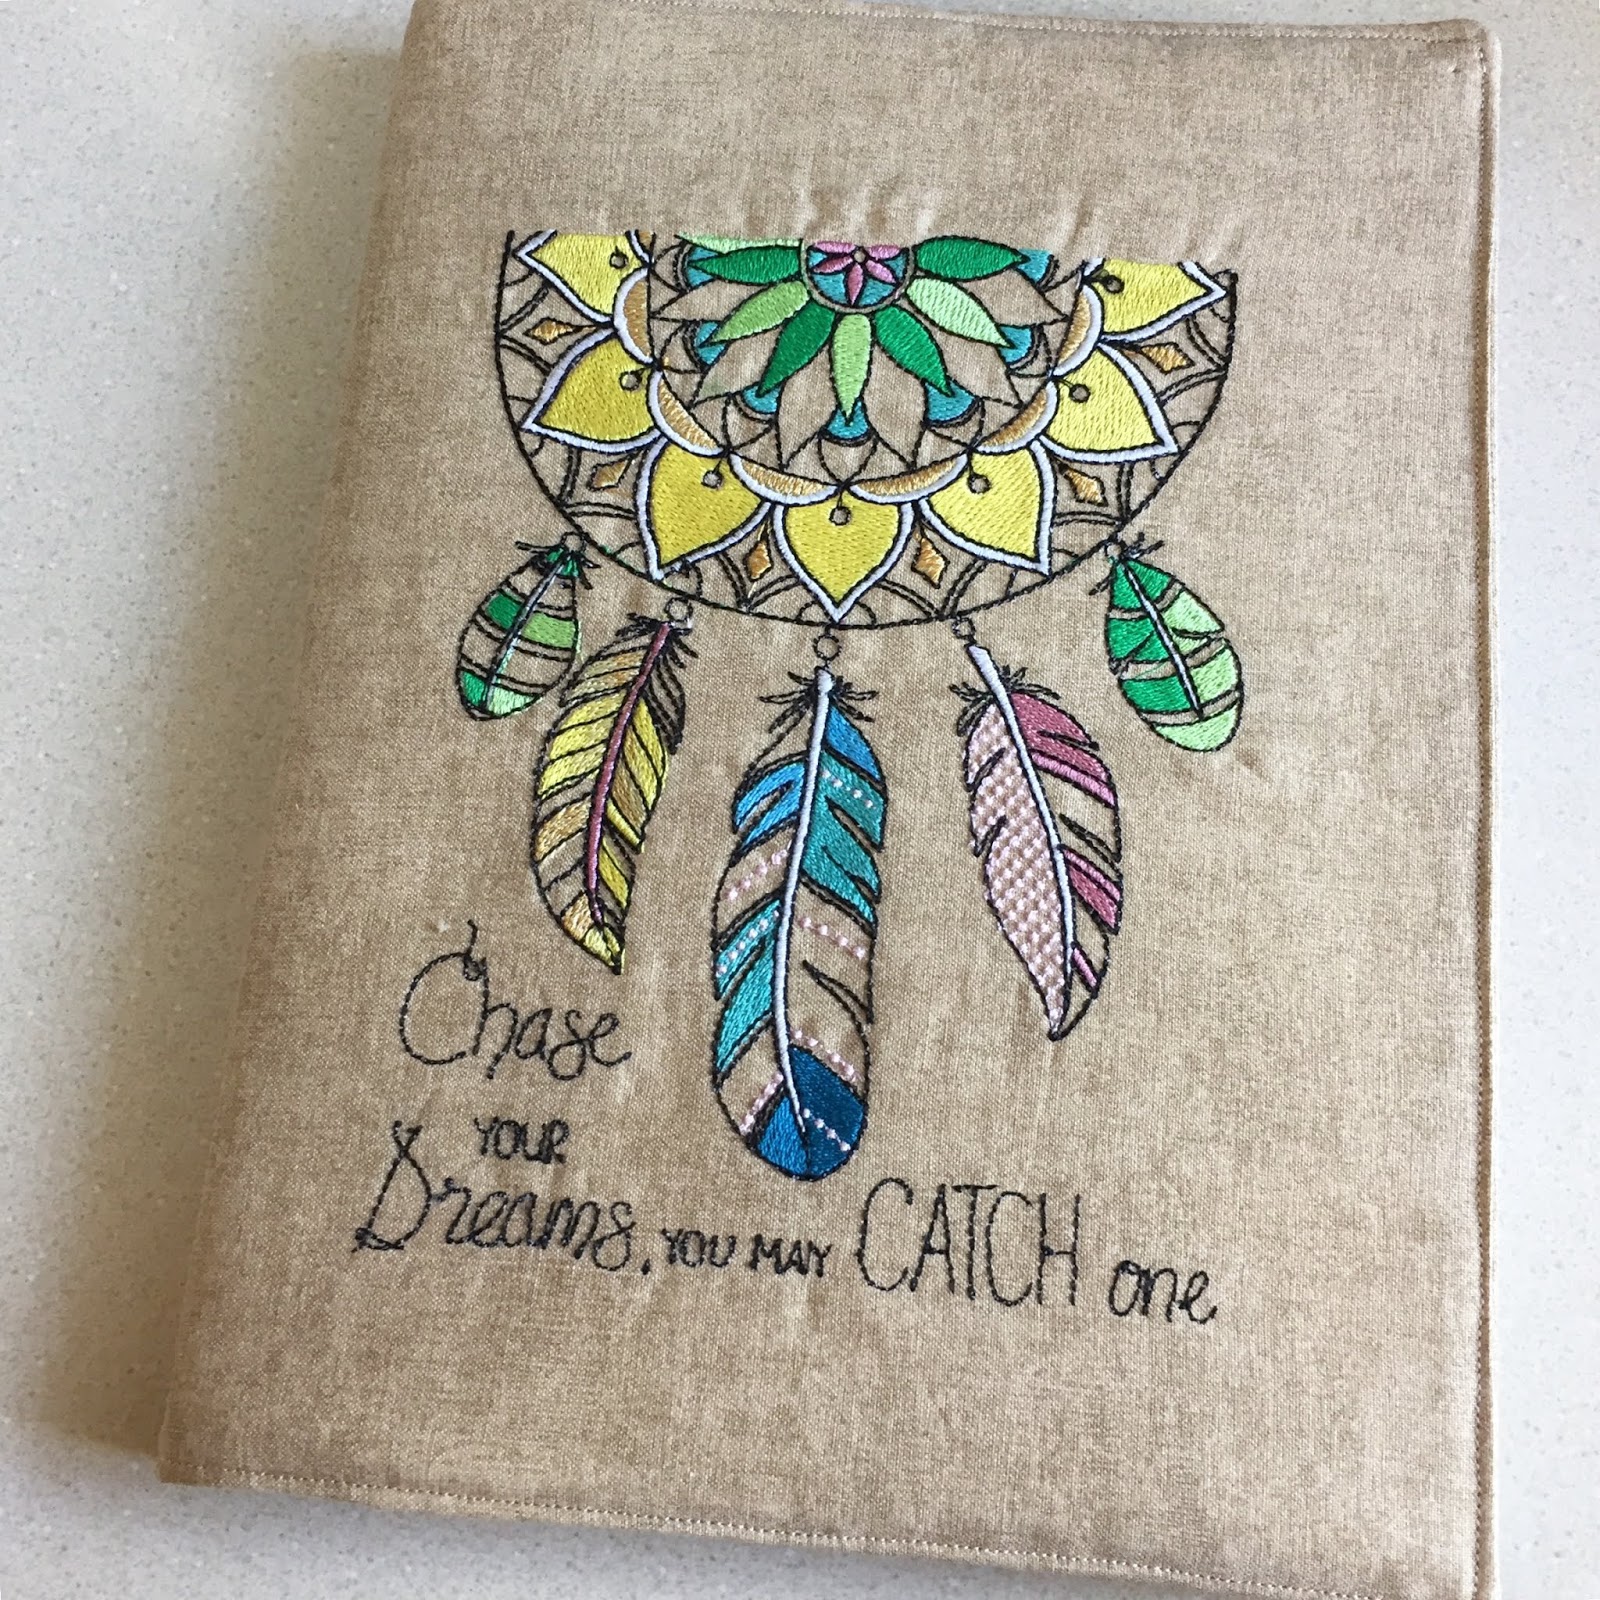 Embroidery Journal 